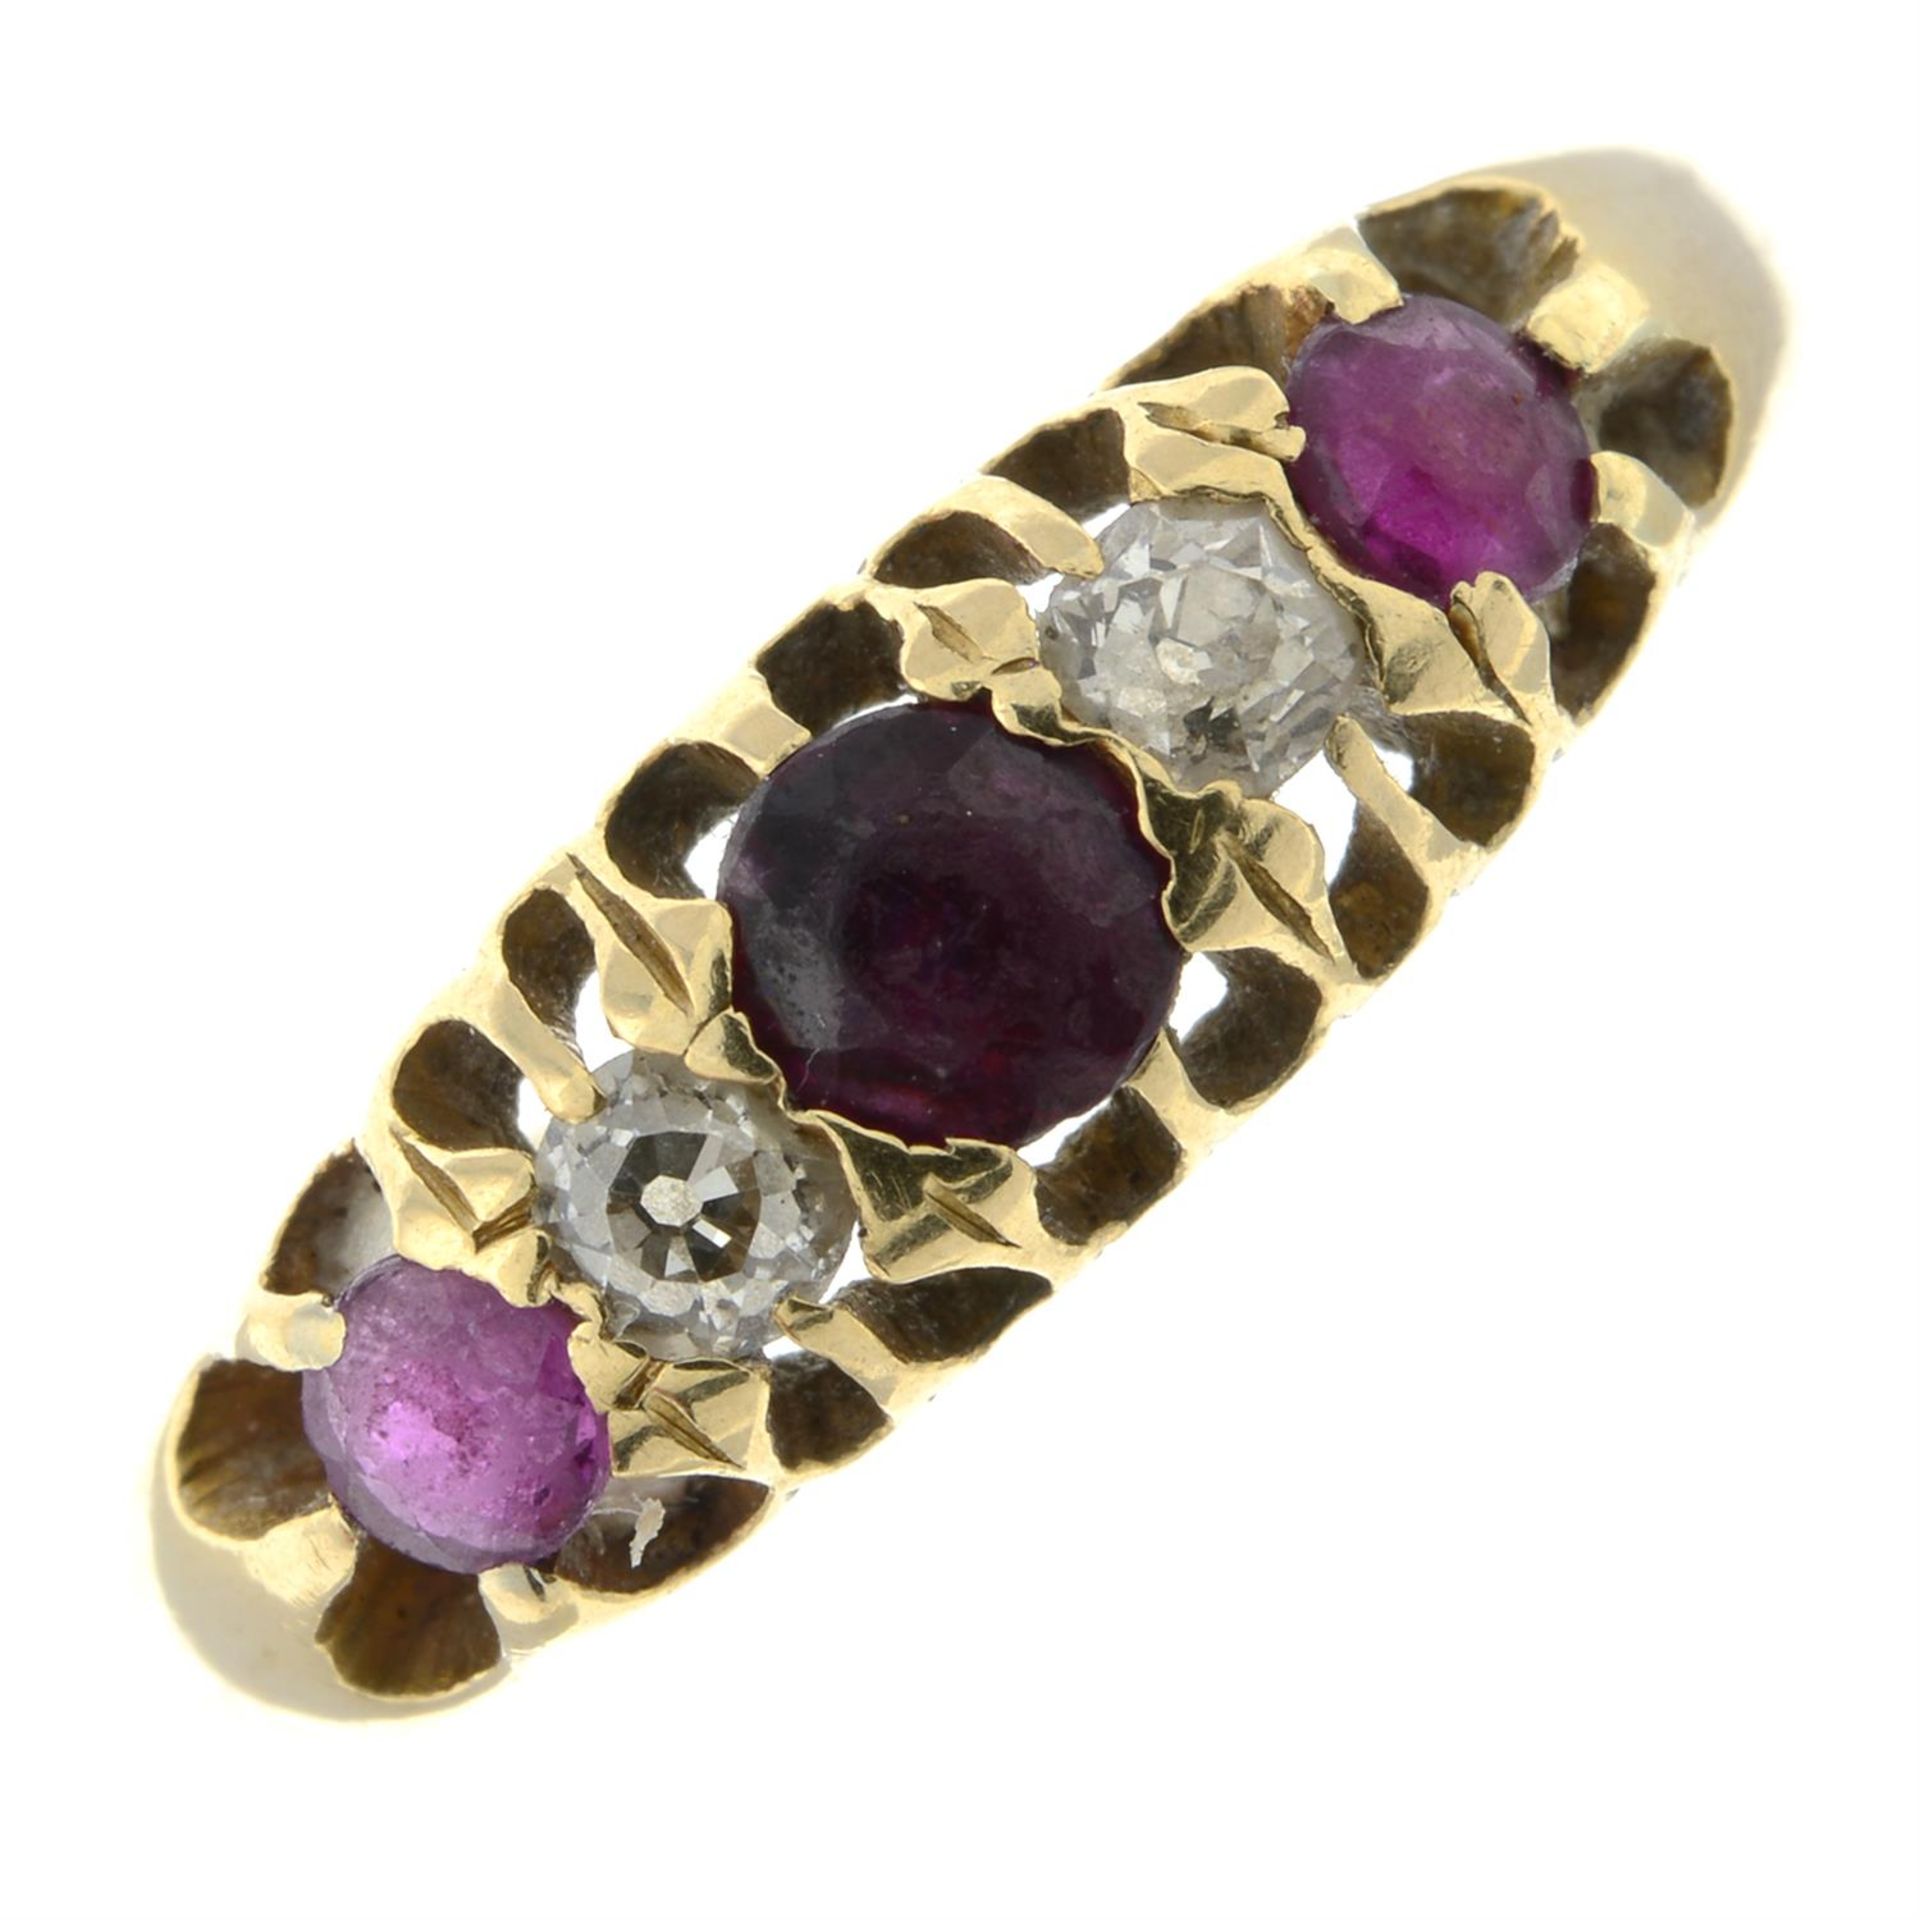 An early 20th century ruby and diamond five-stone ring.